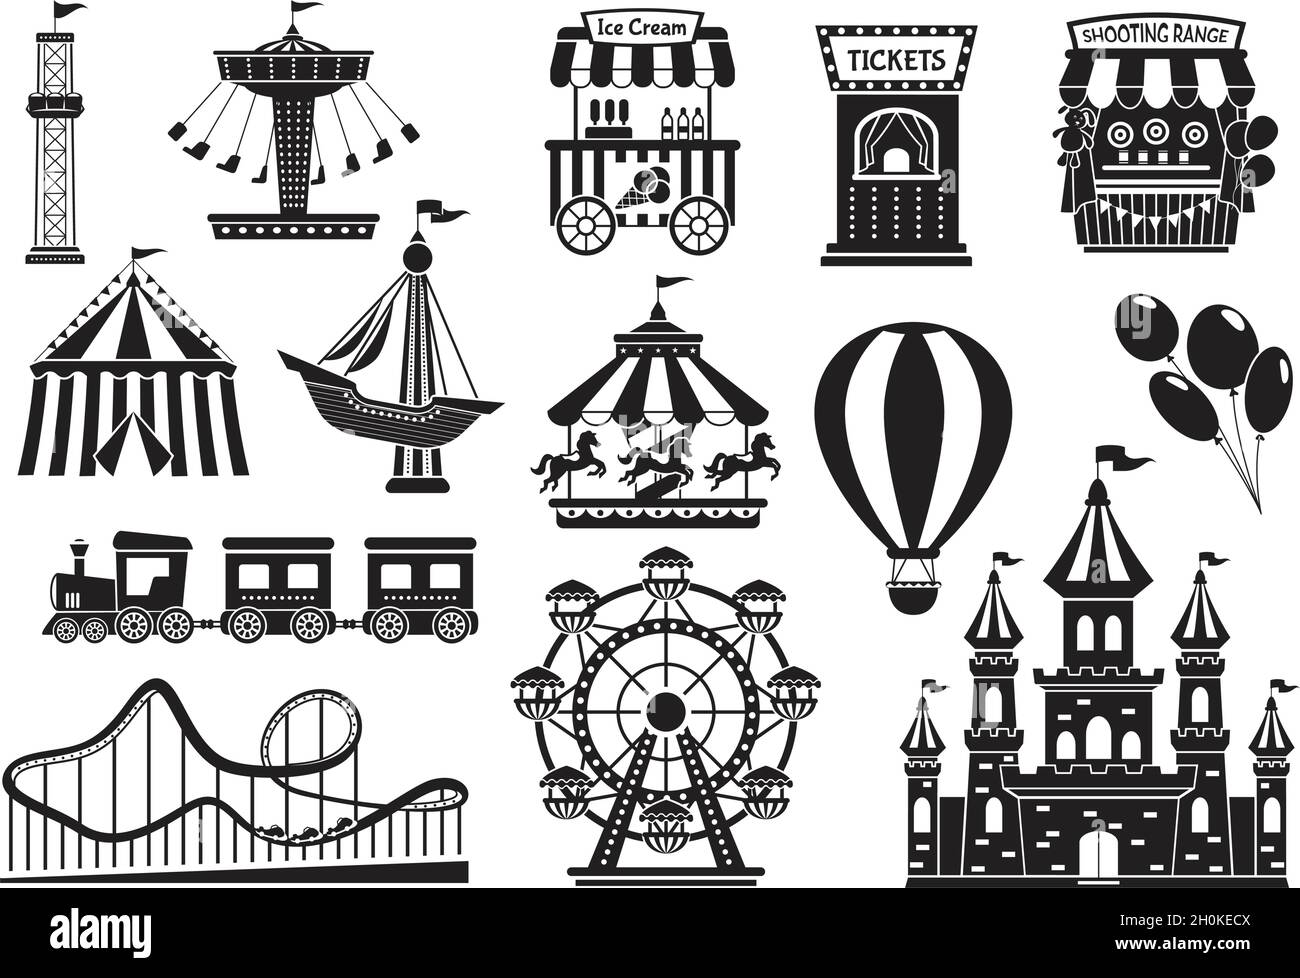 Amusement park silhouette elements, carnival fairground attractions. Kids carousel, roller coaster, circus tent, funfair rides icon vector set. Ferris wheel for fun and entertainment Stock Vector